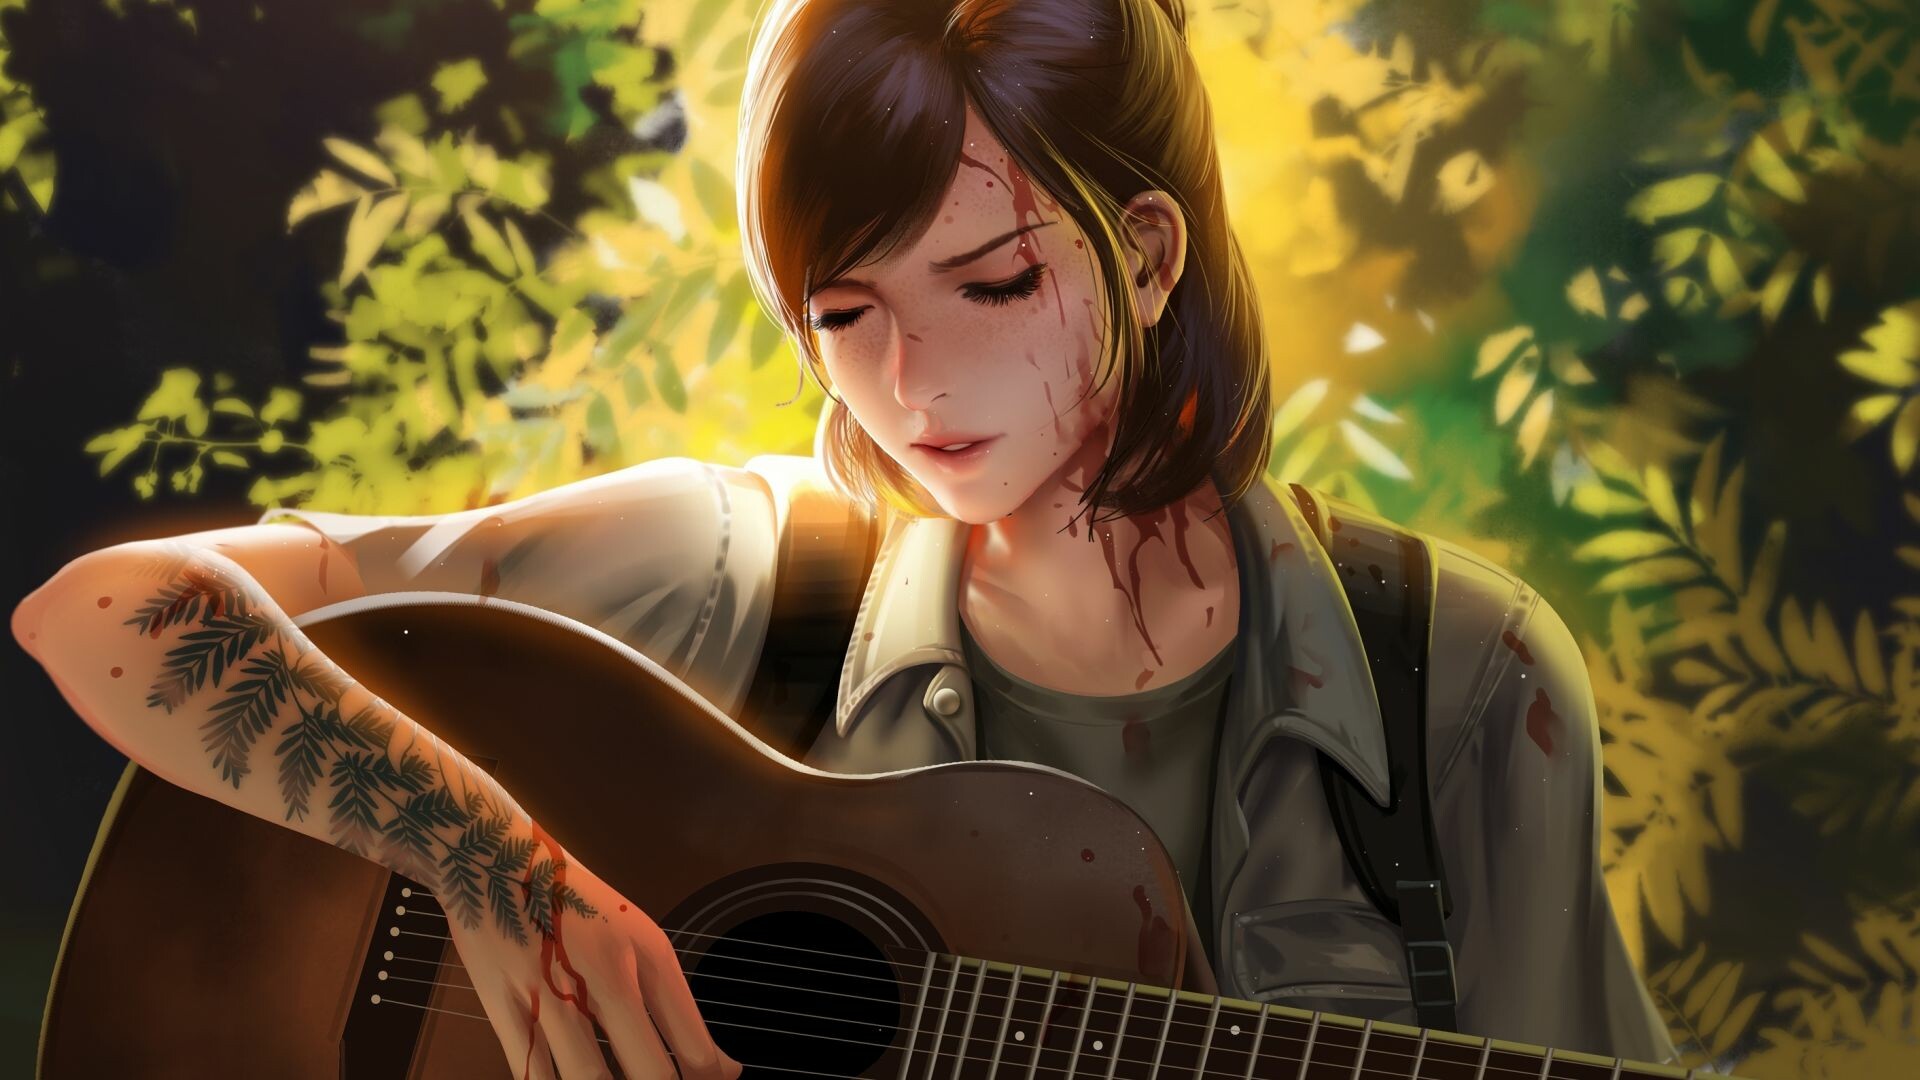 The Last of Us: Ellie, Video game art, Survival shooter. 1920x1080 Full HD Background.